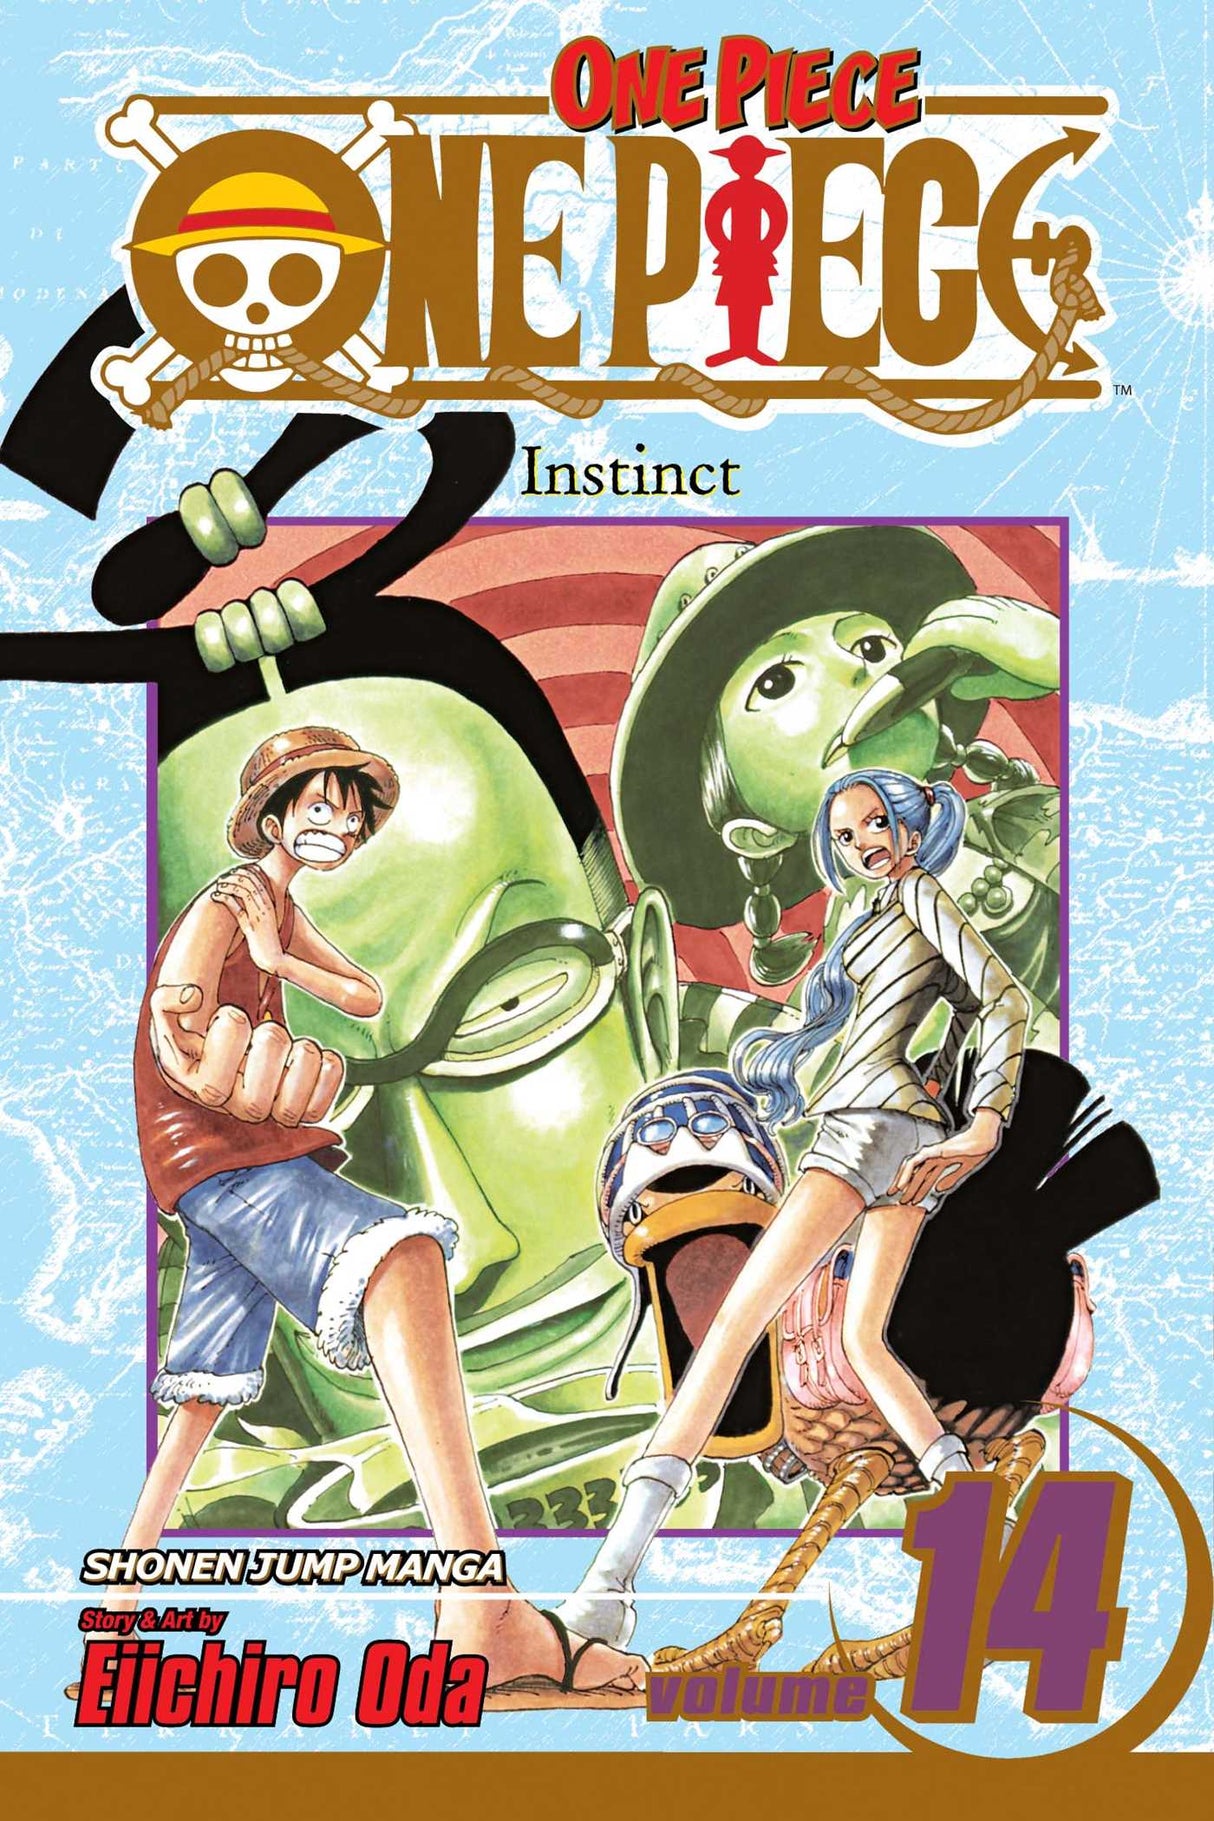 One Piece, Vol. 14: Instinct - Front Cover